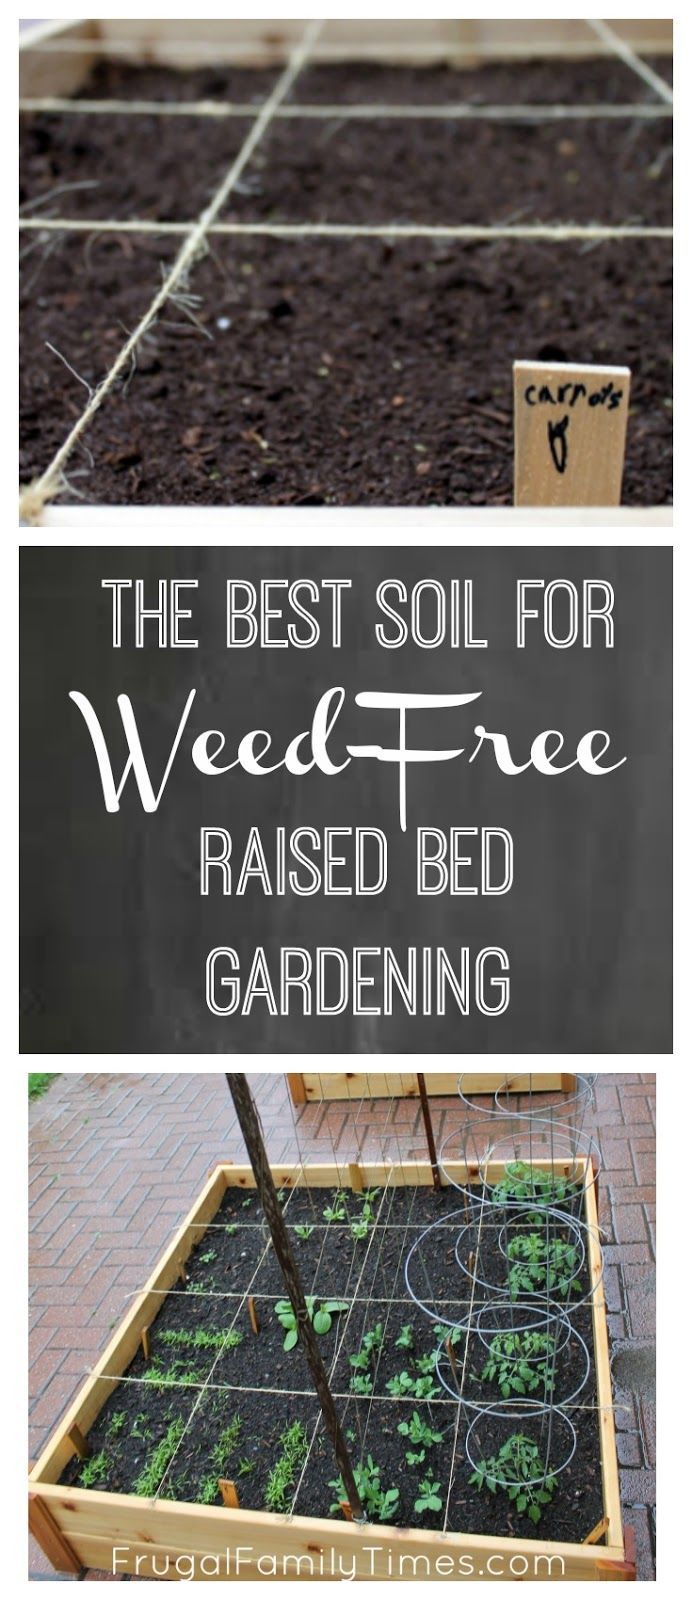 Choosing the soil for your raised bed, square foot garden.  The dirt on how to add soil to your beds to have a no or low weed